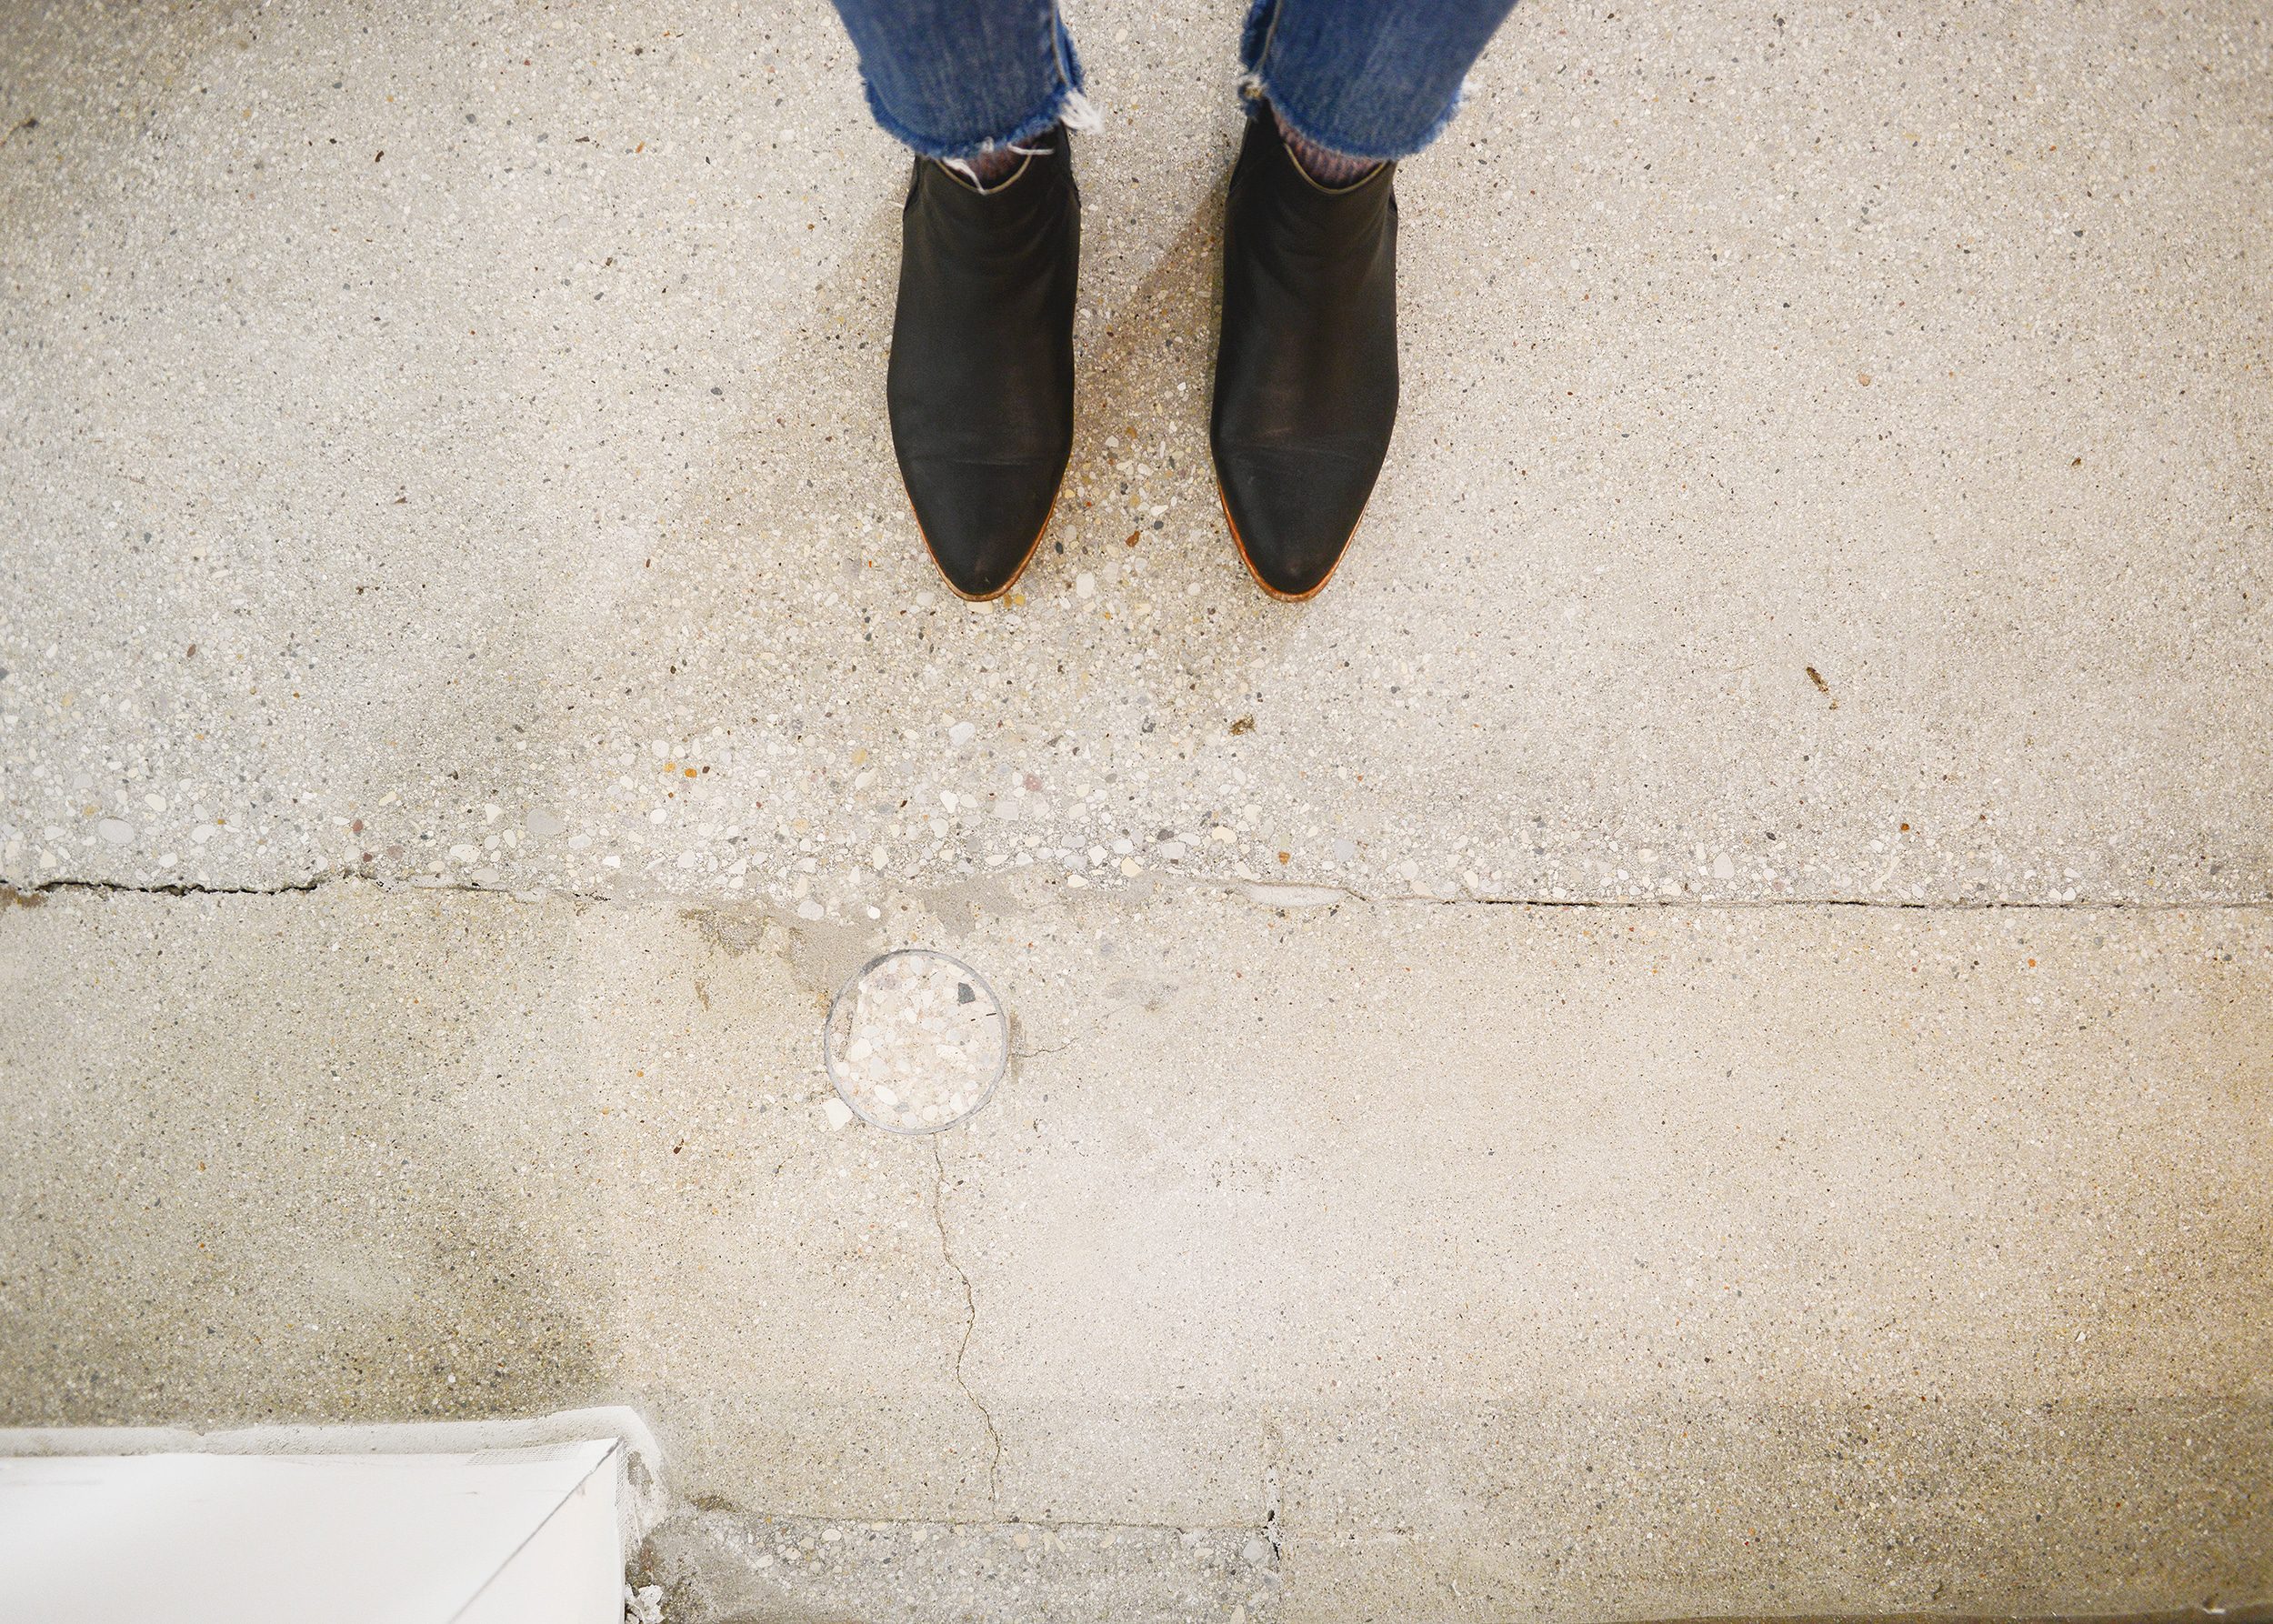 Black boots on unpolished concrete floors with imperfections | via Yellow Brick Home